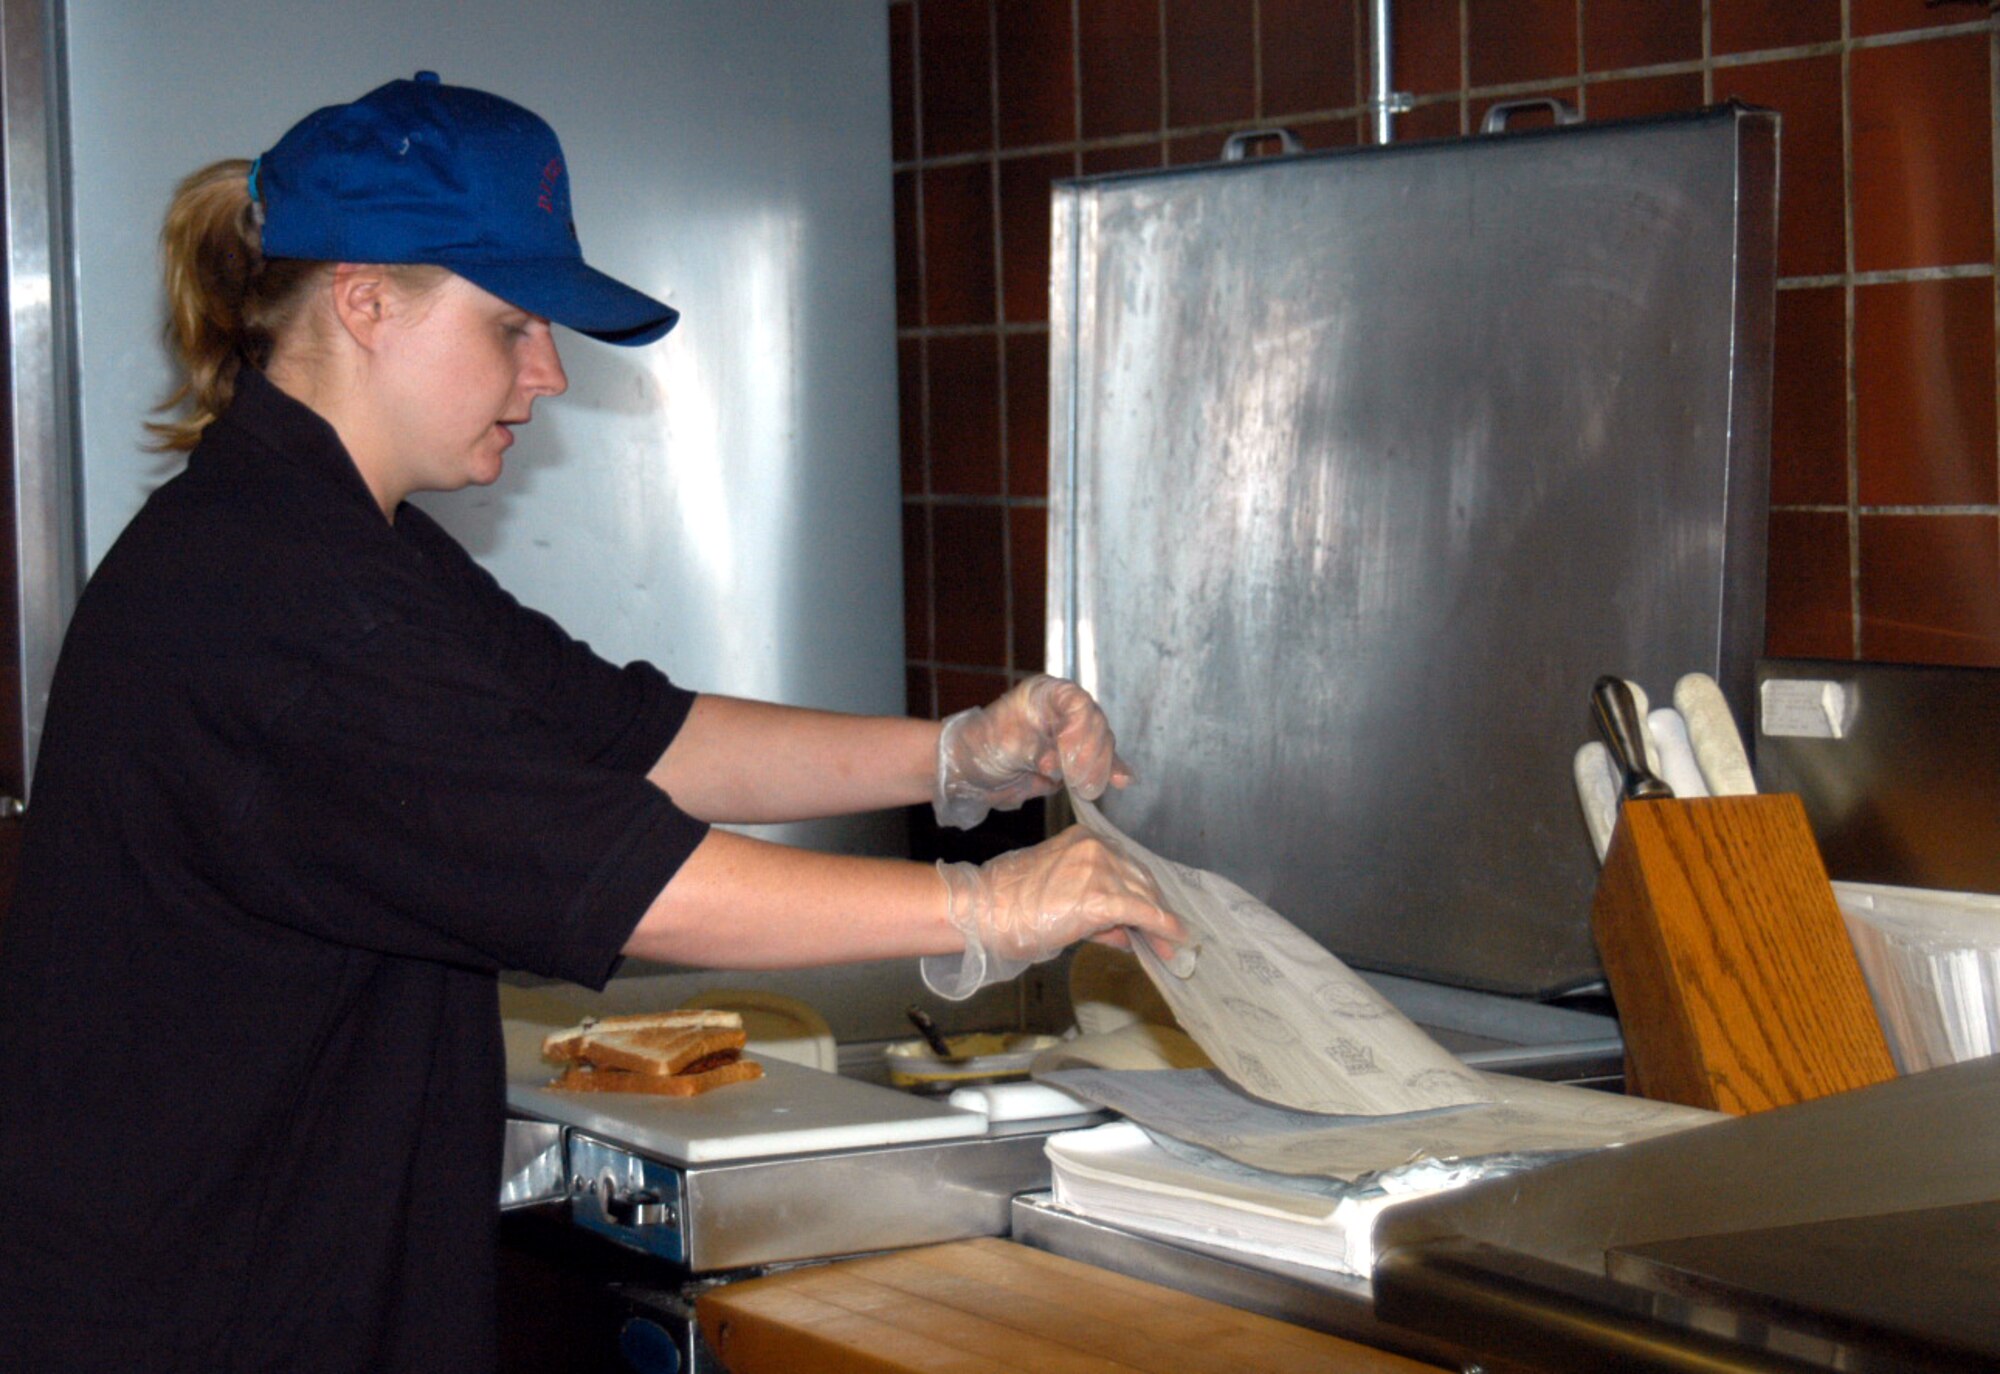 Nikki Decicco, Dyess Lanes' food and customer service employee, prepares a sandwich for a customer in the old kitchen facilities June 12. The bowling alley will close July 9 for $750,000 renovations, including the 'Deadwood Cafe' where visitors may choose from an entirely re-vamped menu. (U.S. Air Force photo/Airman 1st Class Carolyn Viss)                                